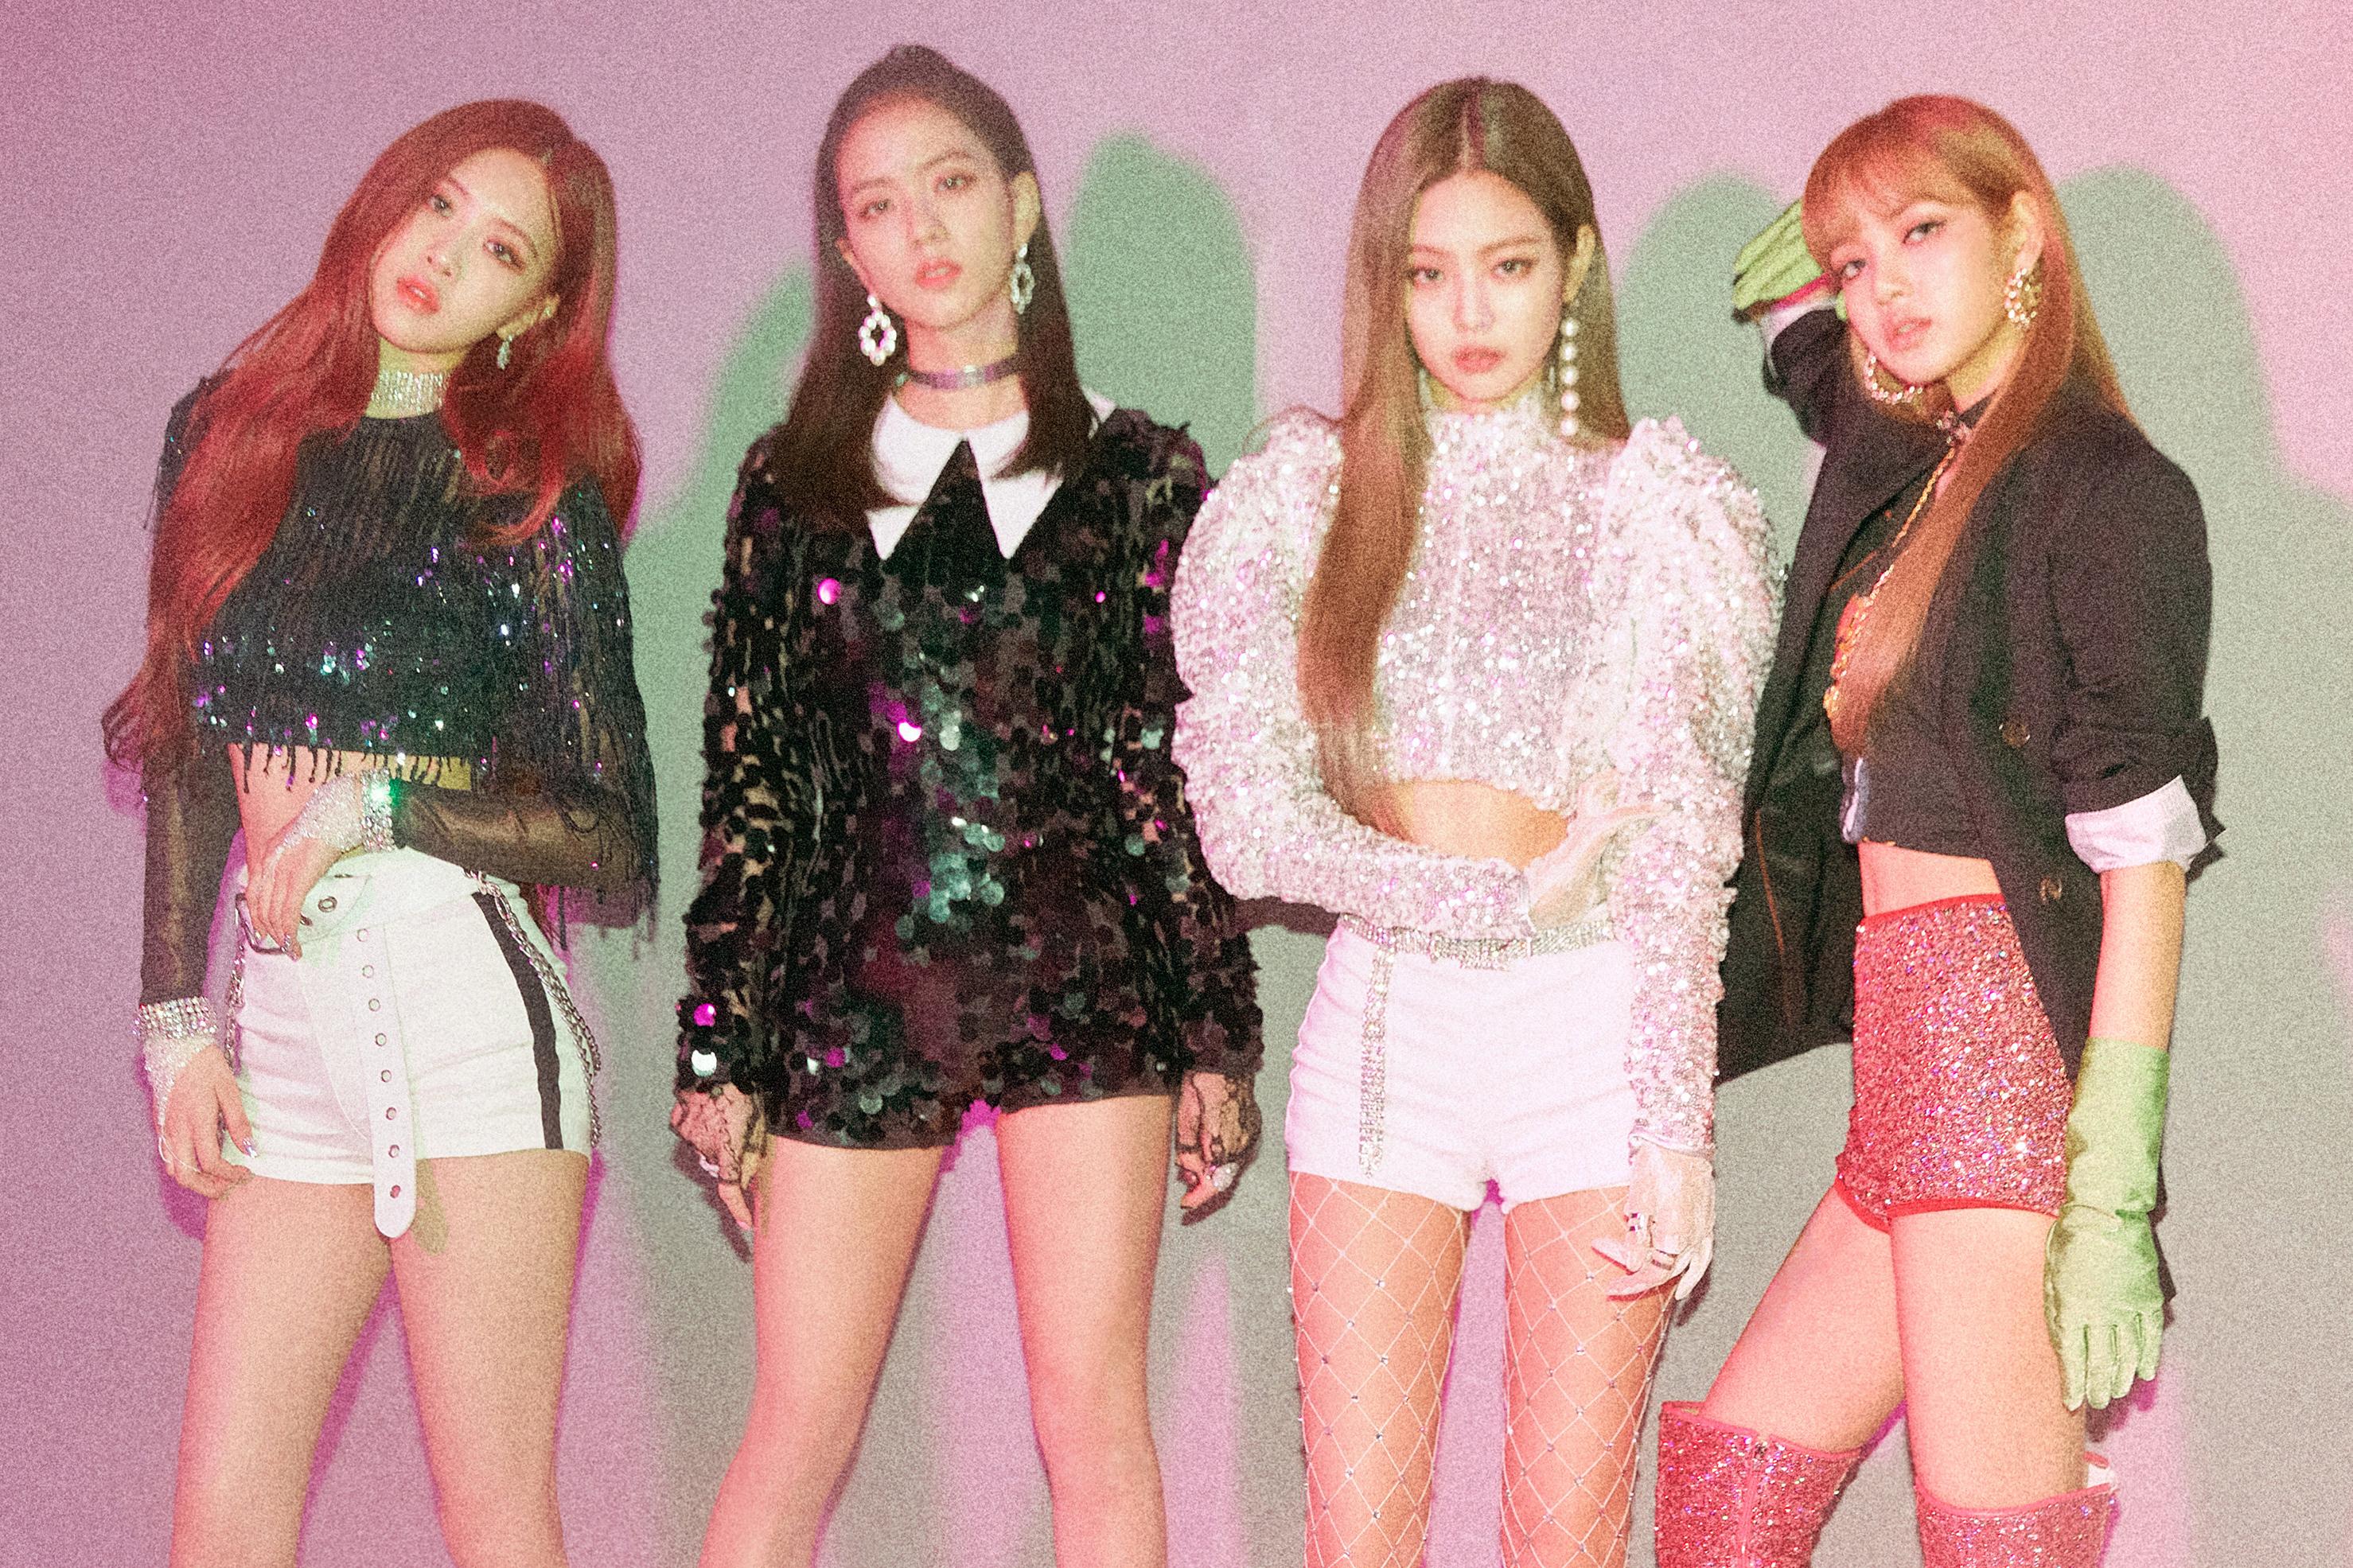 Blackpink: 5 Things To Know About K Pop Group Playing Coachella